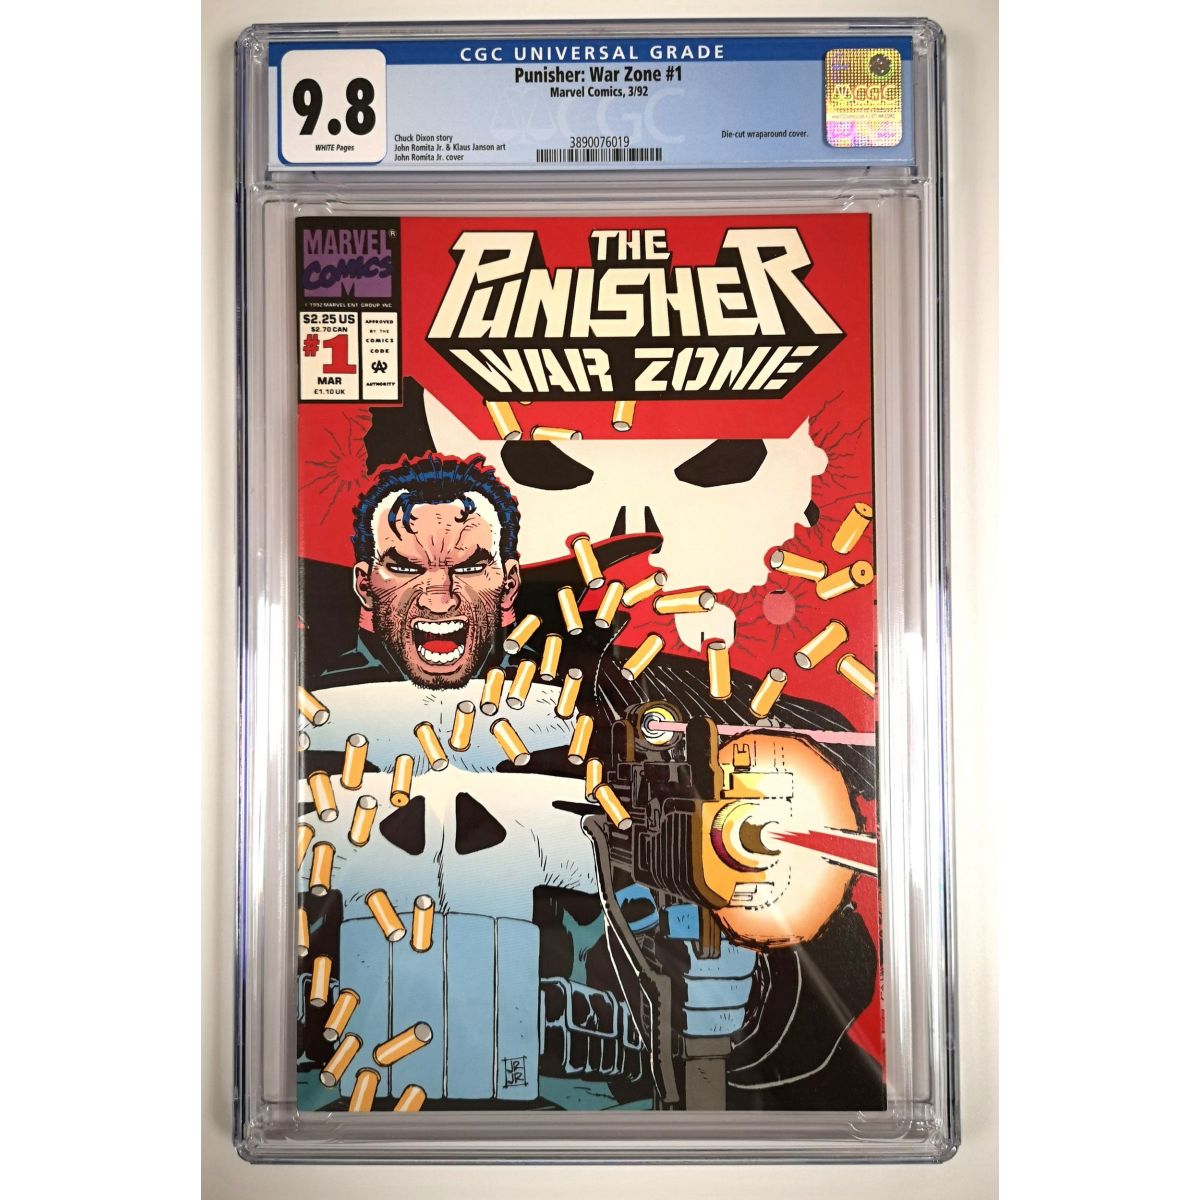 Item Comics - Marvel - Punisher: War Zone N°1 (1992) - [CGC 9.8 - White Pages]